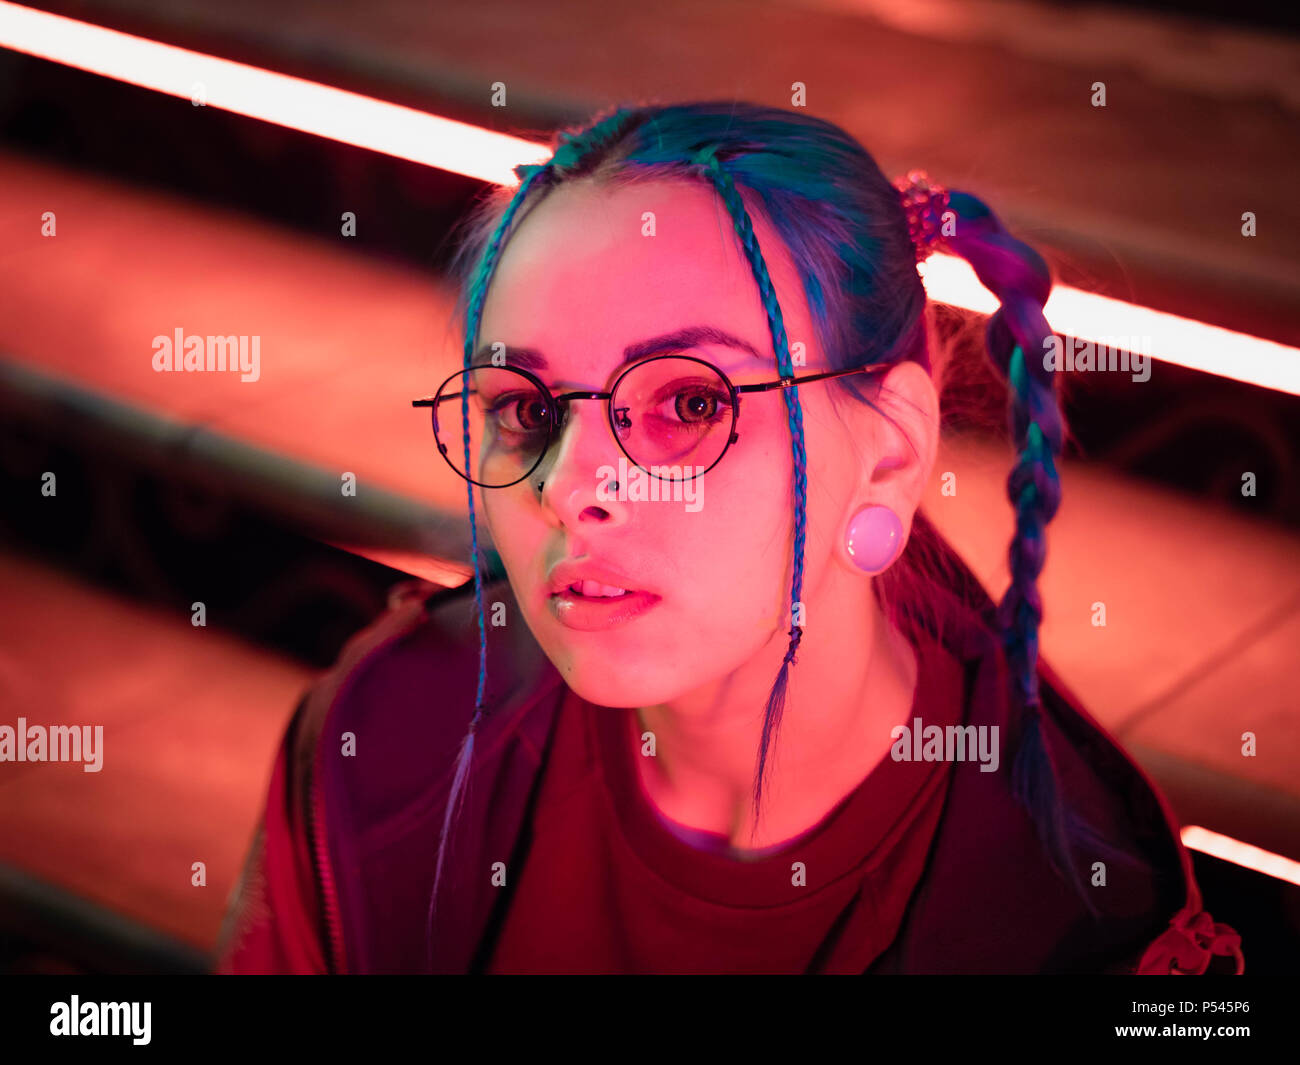 Young pretty girl with unusual hairstyle sitting on stairs which glowing red neon lights. City at night. Dyed blue hair in braids. Happy hipster teenager in glasses. Stock Photo